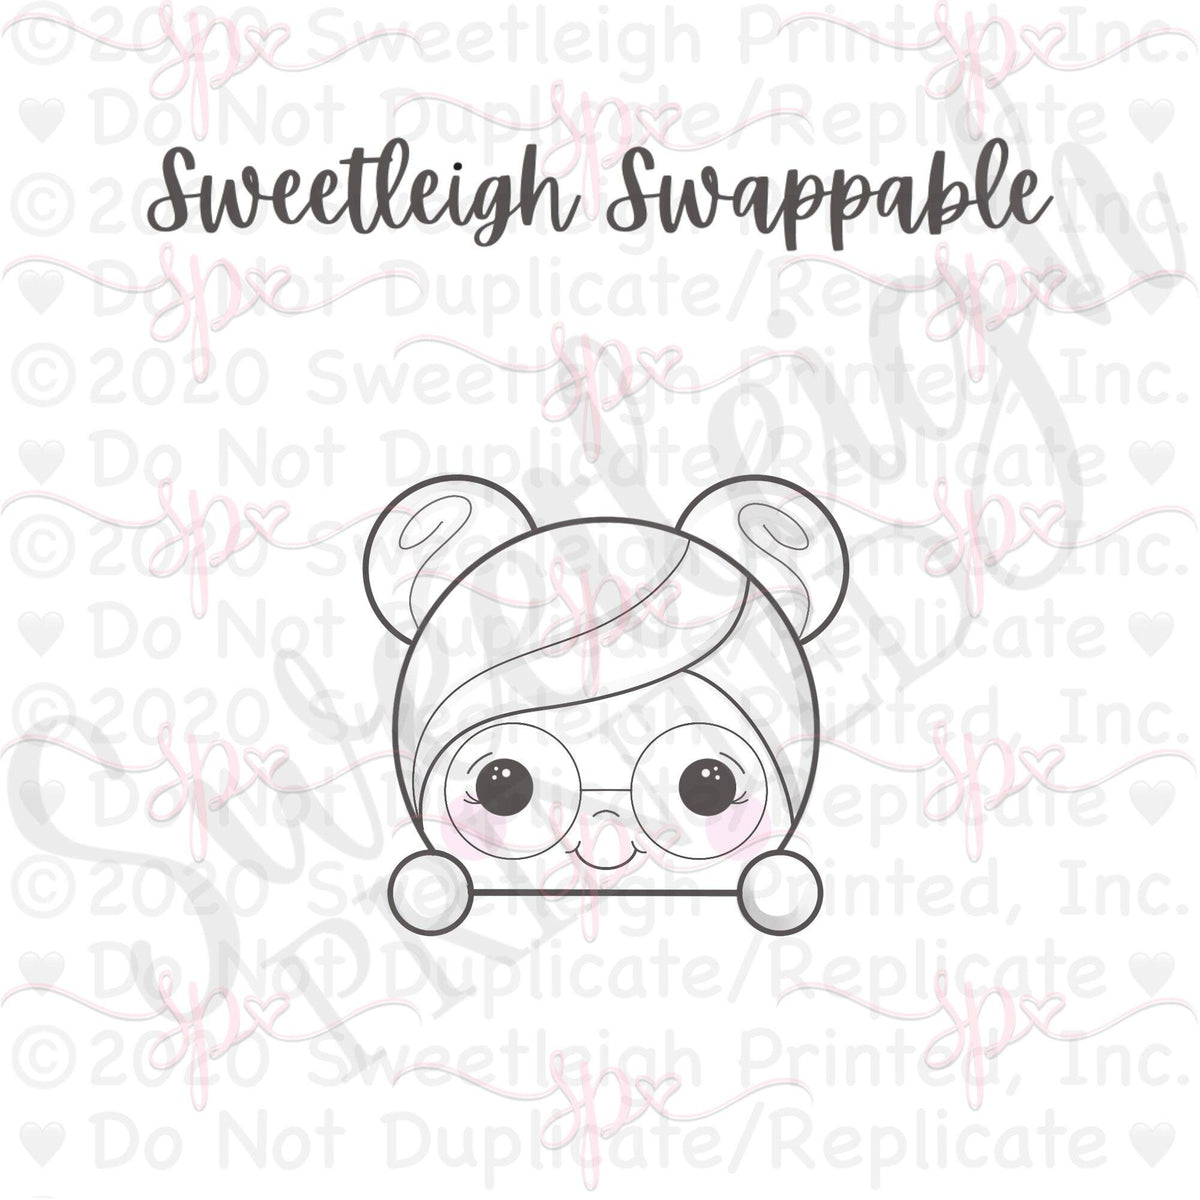 Sweetleigh Swappable Teddy Face Cookie Cutter - Sweetleigh 